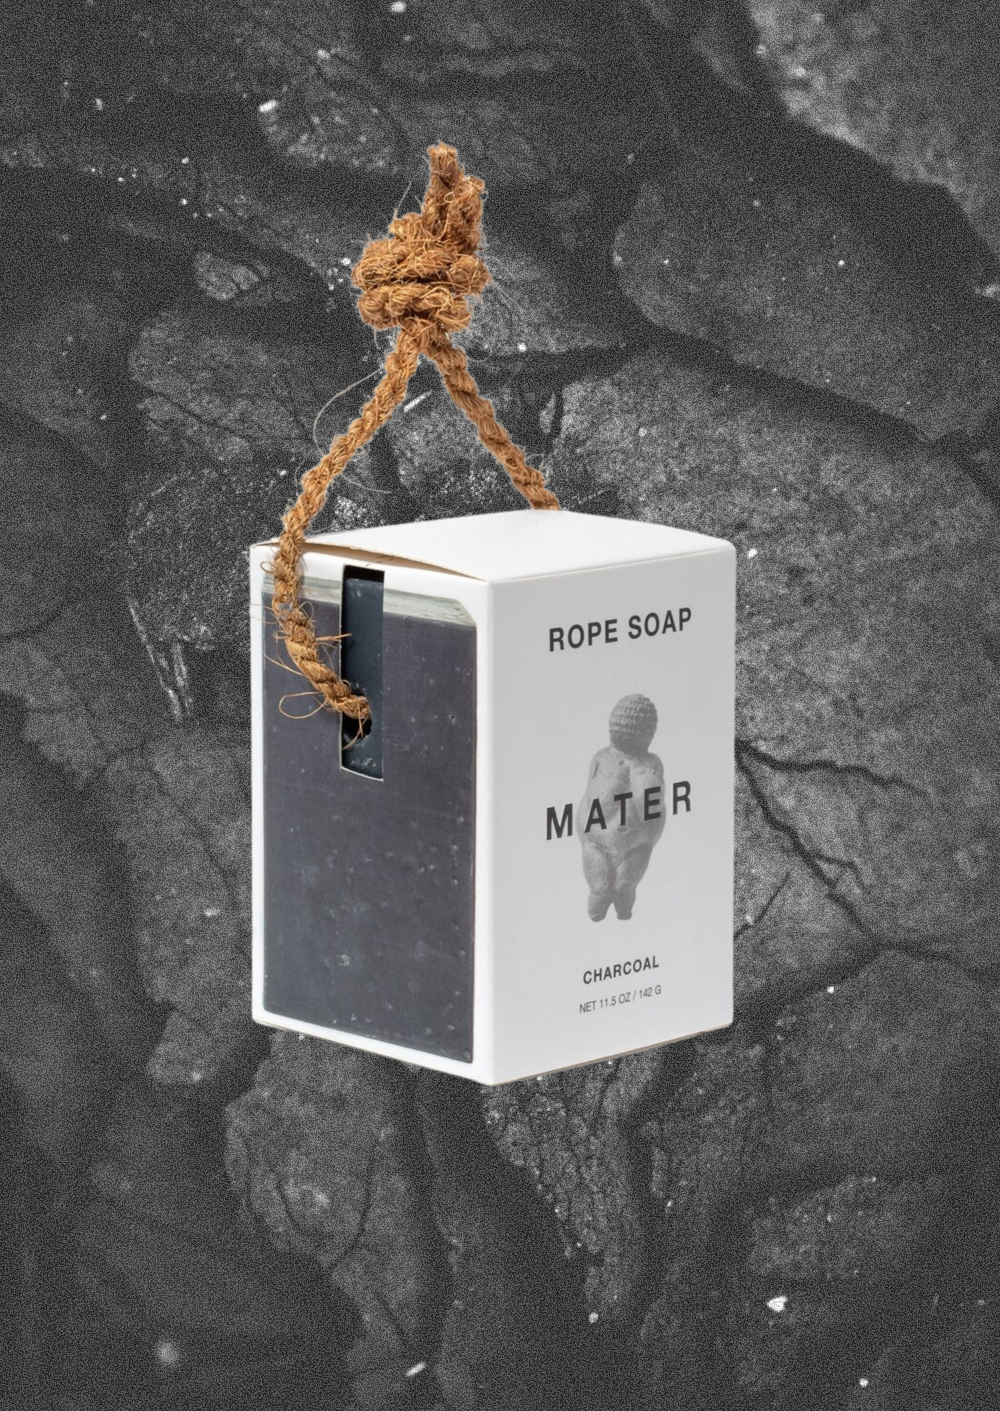 Mater Soap Charcoal Rope